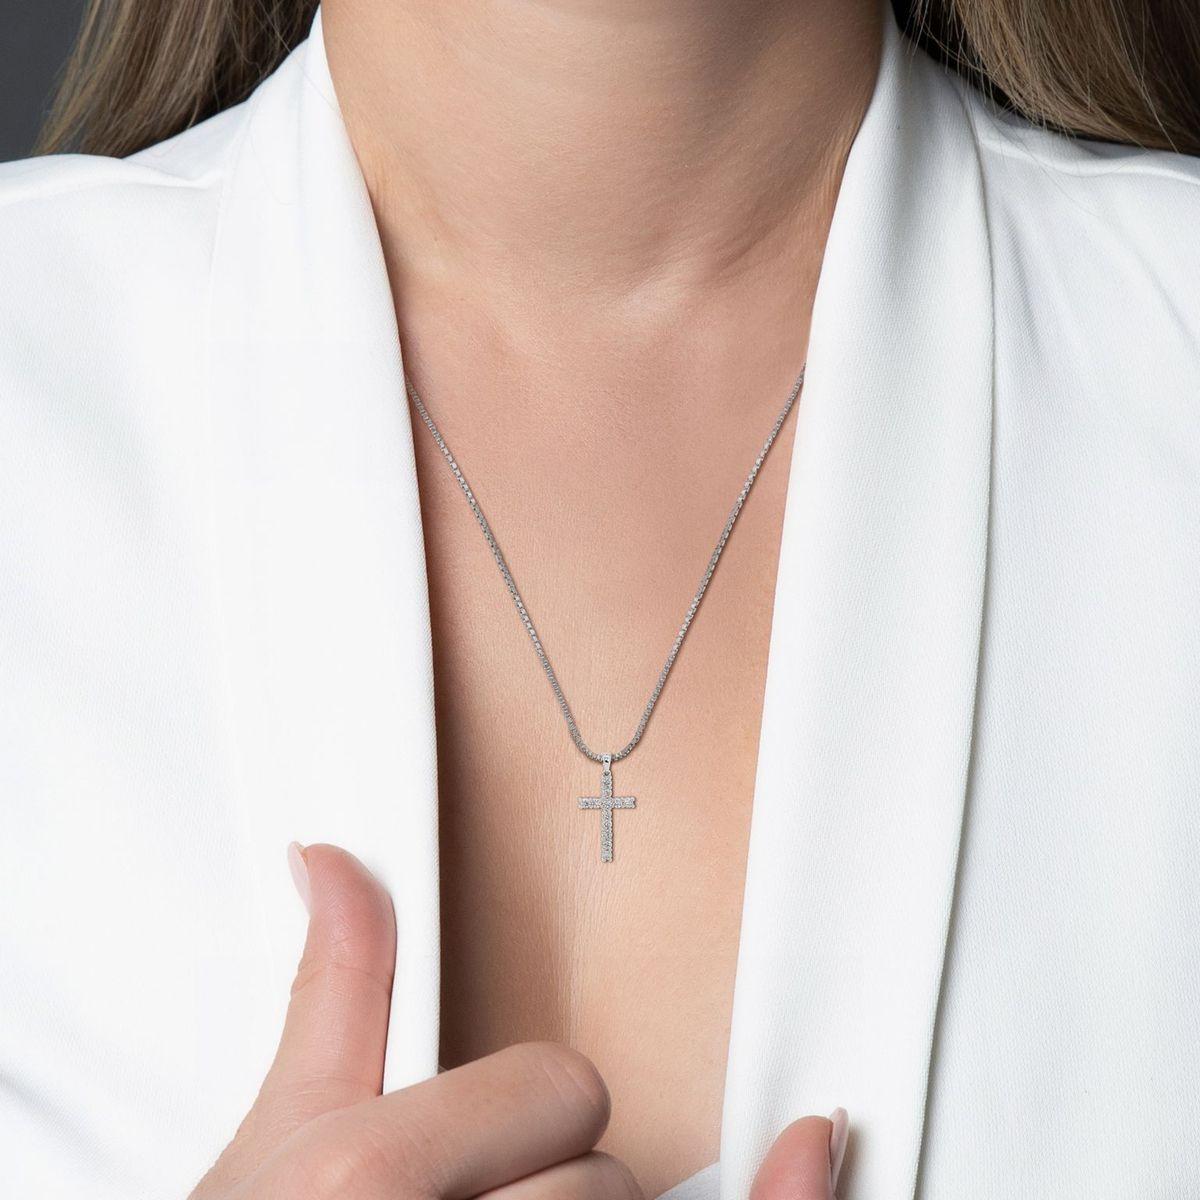 Enter the realm of divine elegance with the Exquisite 1.00ct Diamond Cross Necklace, a radiant fusion of spirituality and sophistication. This meticulously crafted necklace is adorned with a stunning cross pendant, featuring a total of 1.00 carat of